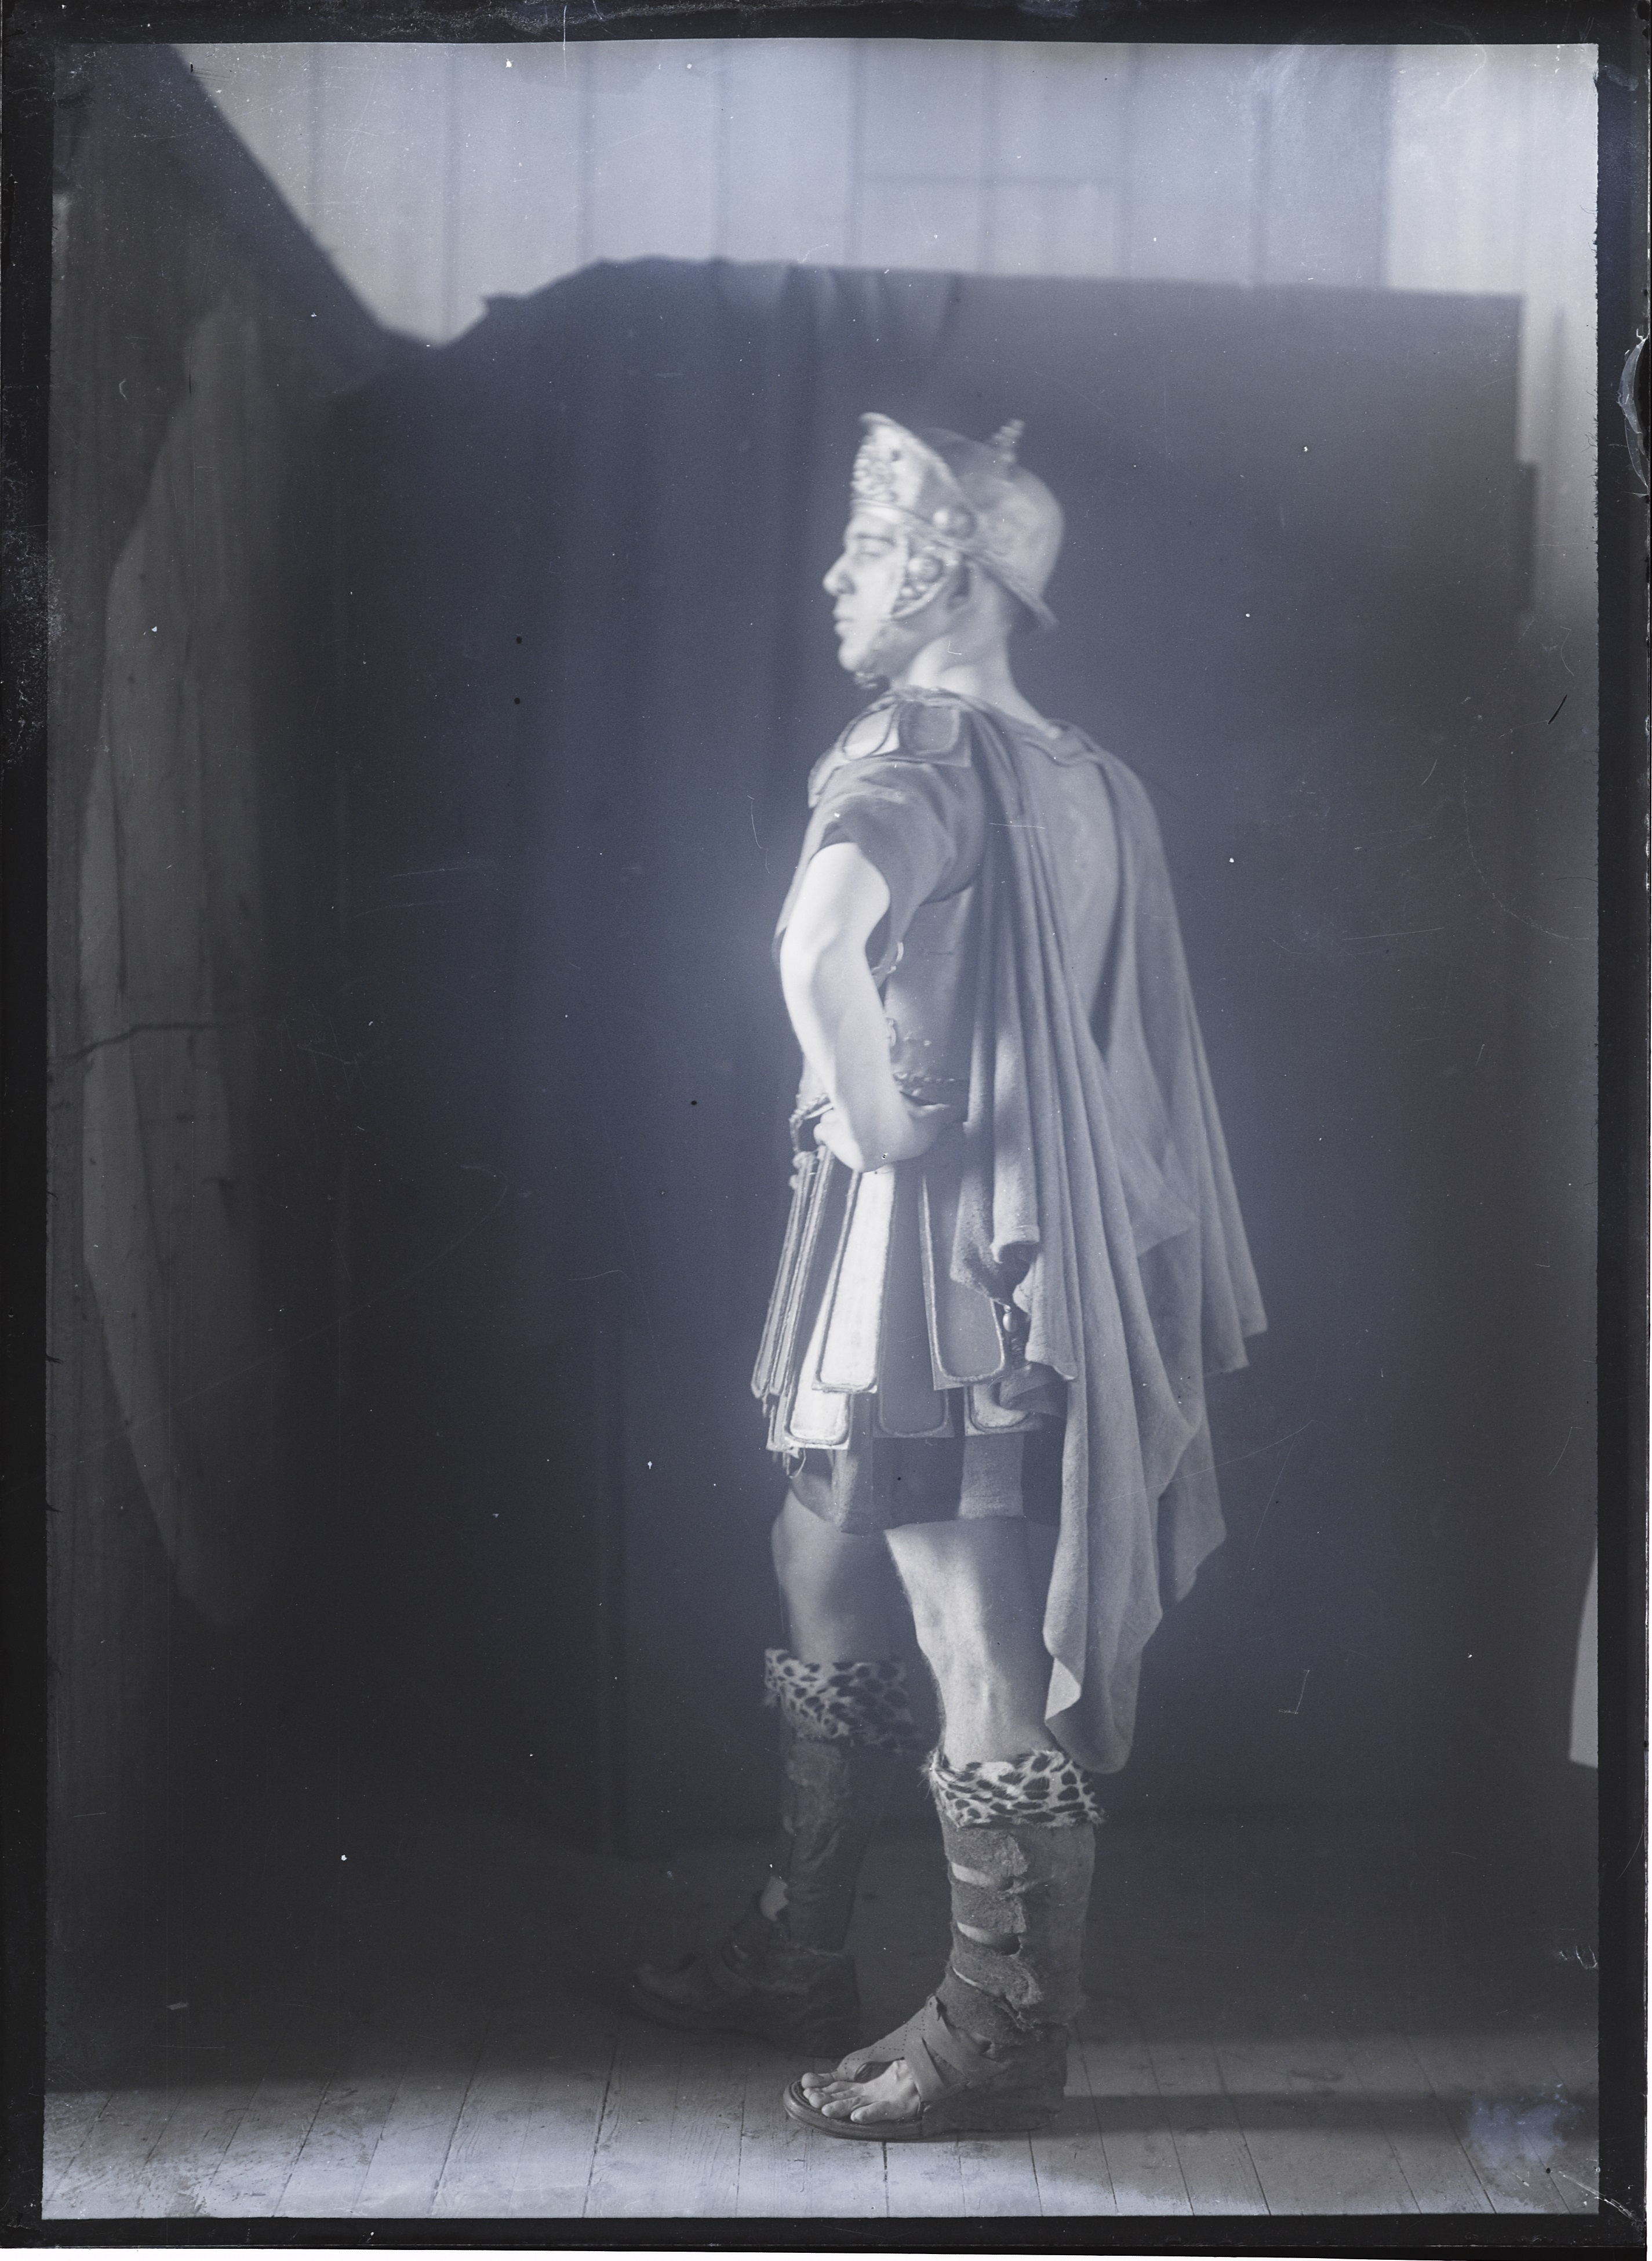 Glasgow School of Art glass plate negative featuring student in costume, early 1900s